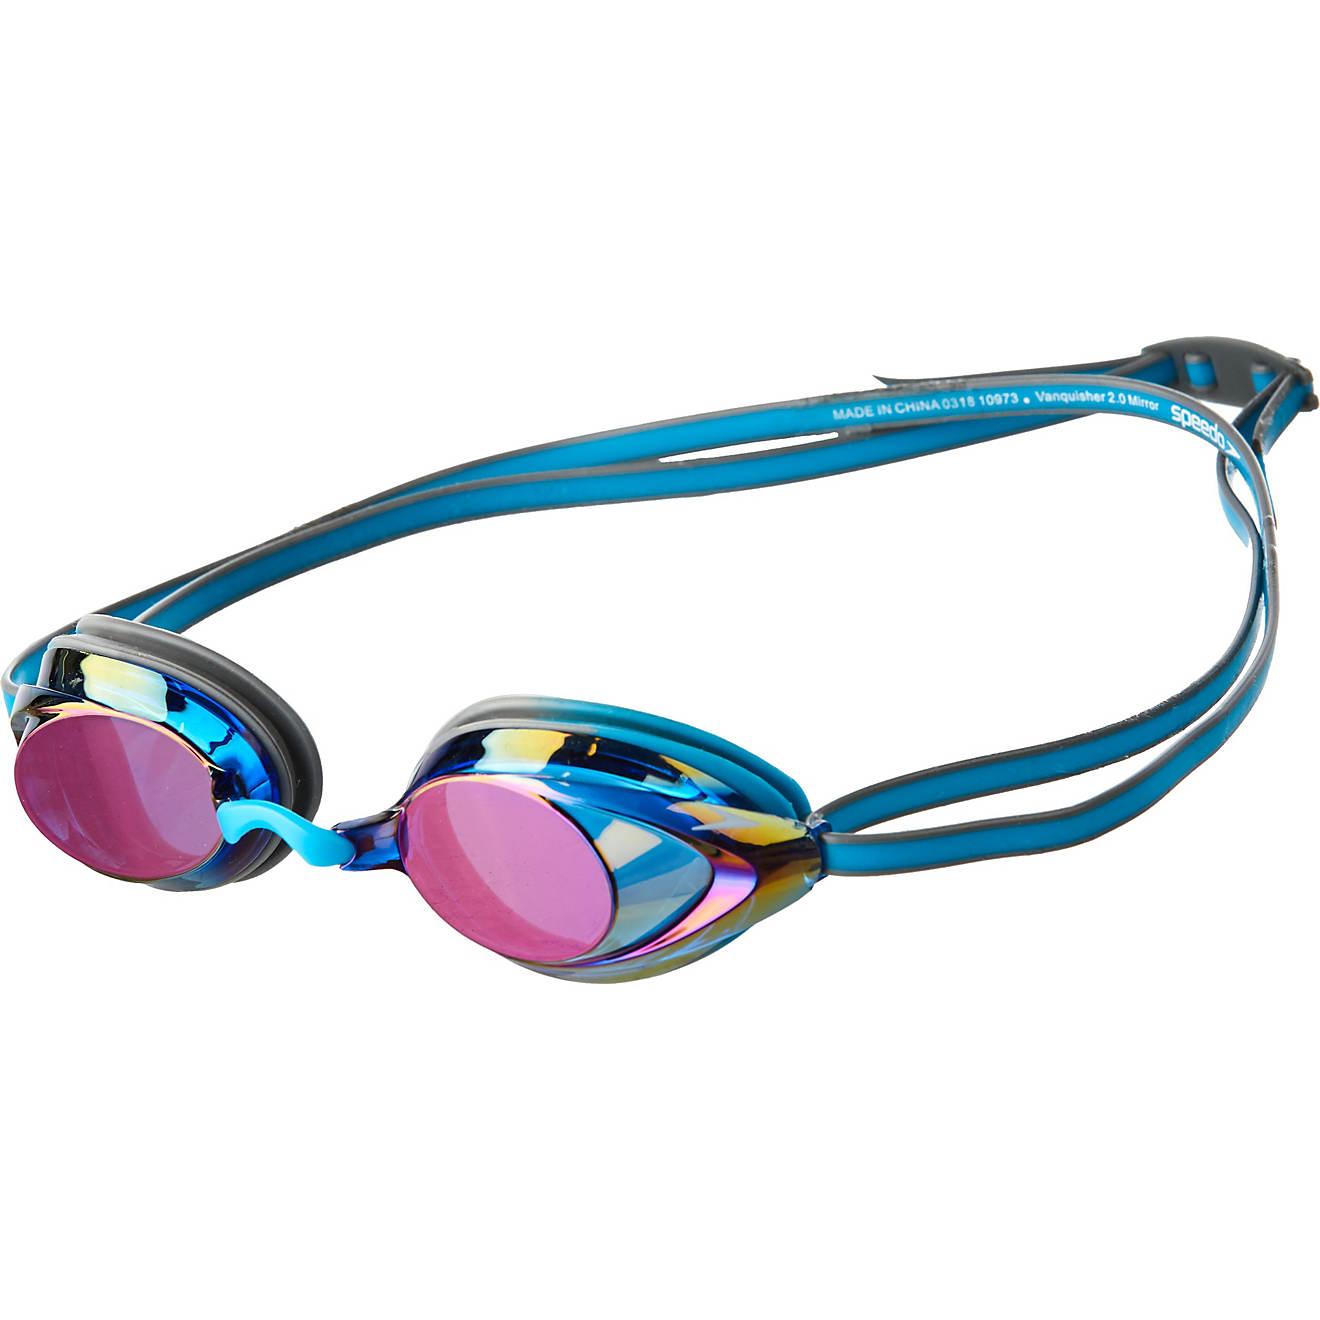 Pack of 2 Speedo Vanquisher 2.0 Adult Competitive Swim Goggle Blue 